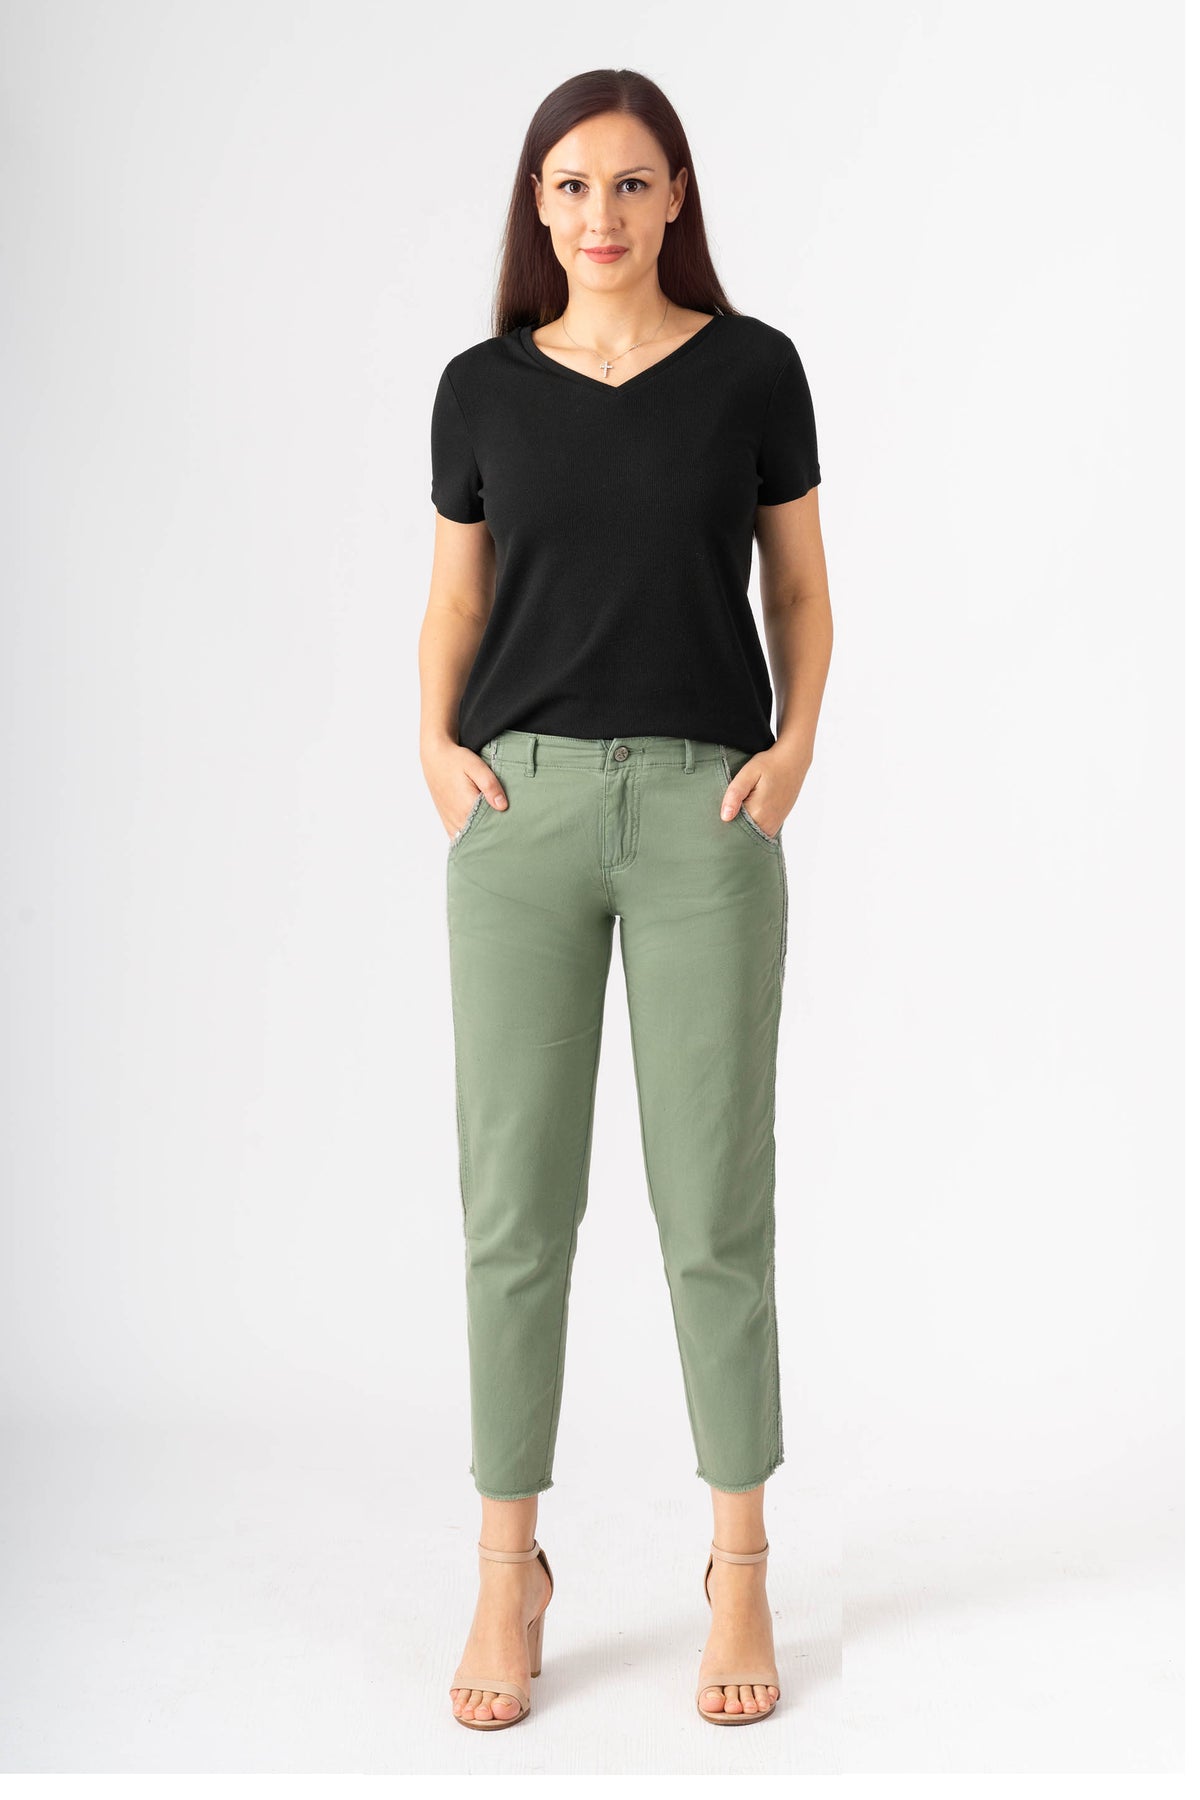 Easy fit pants with Raw Stripes in Myrtle Green